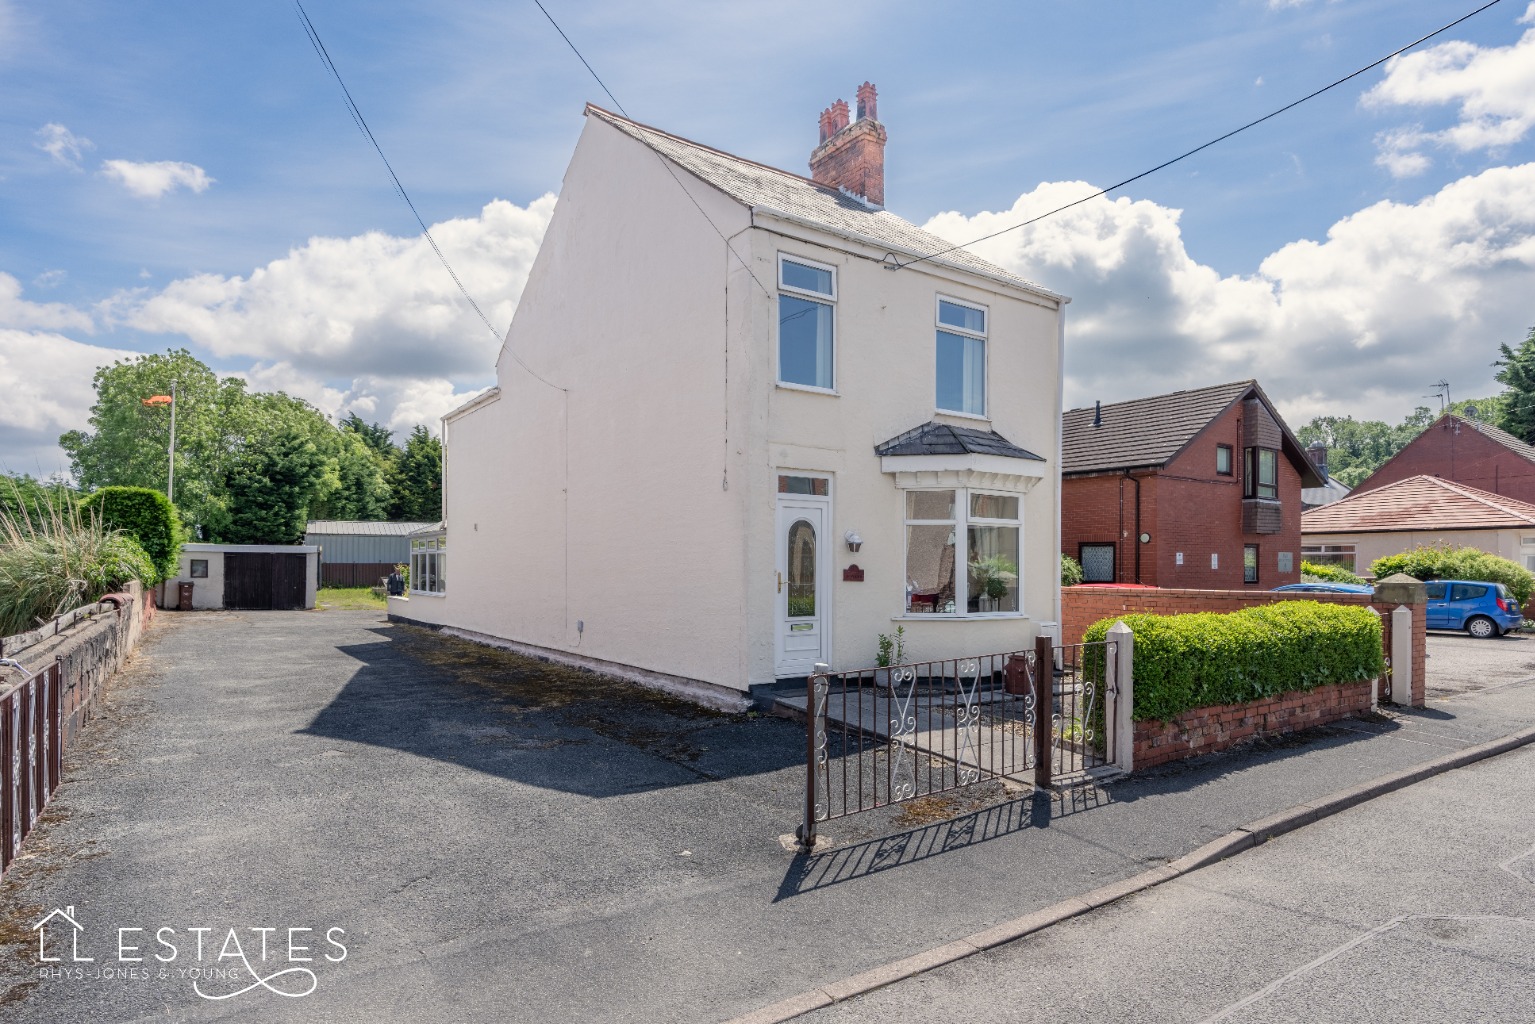 2 bed detached house for sale in Mornant Avenue, Holywell - Property Image 1